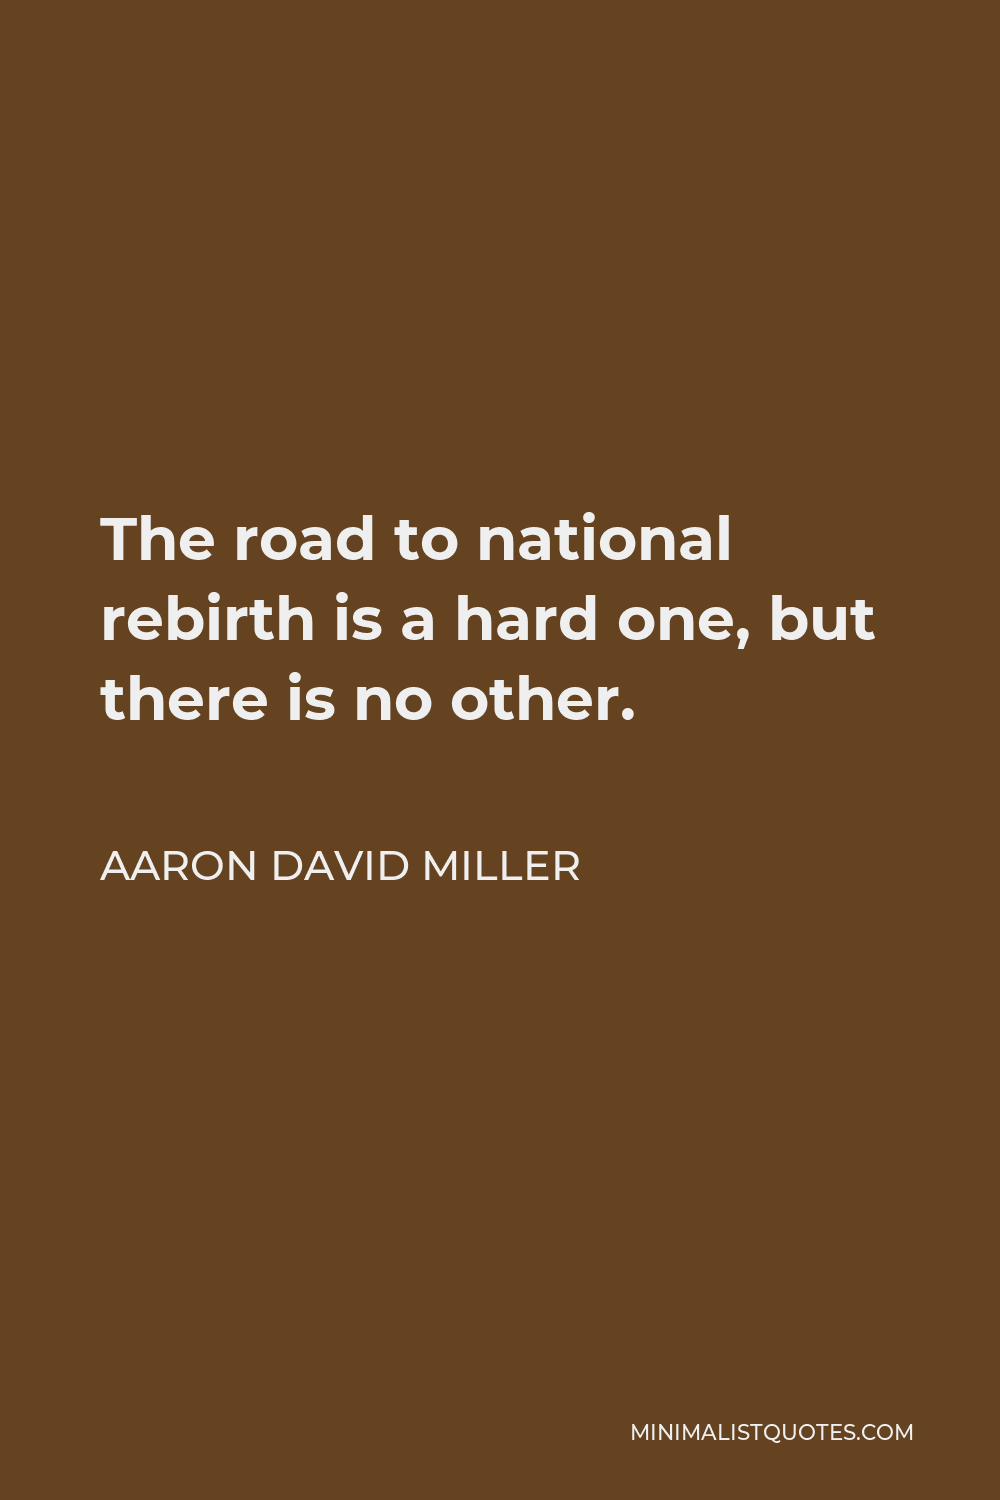 Aaron David Miller Quote - The road to national rebirth is a hard one, but there is no other.